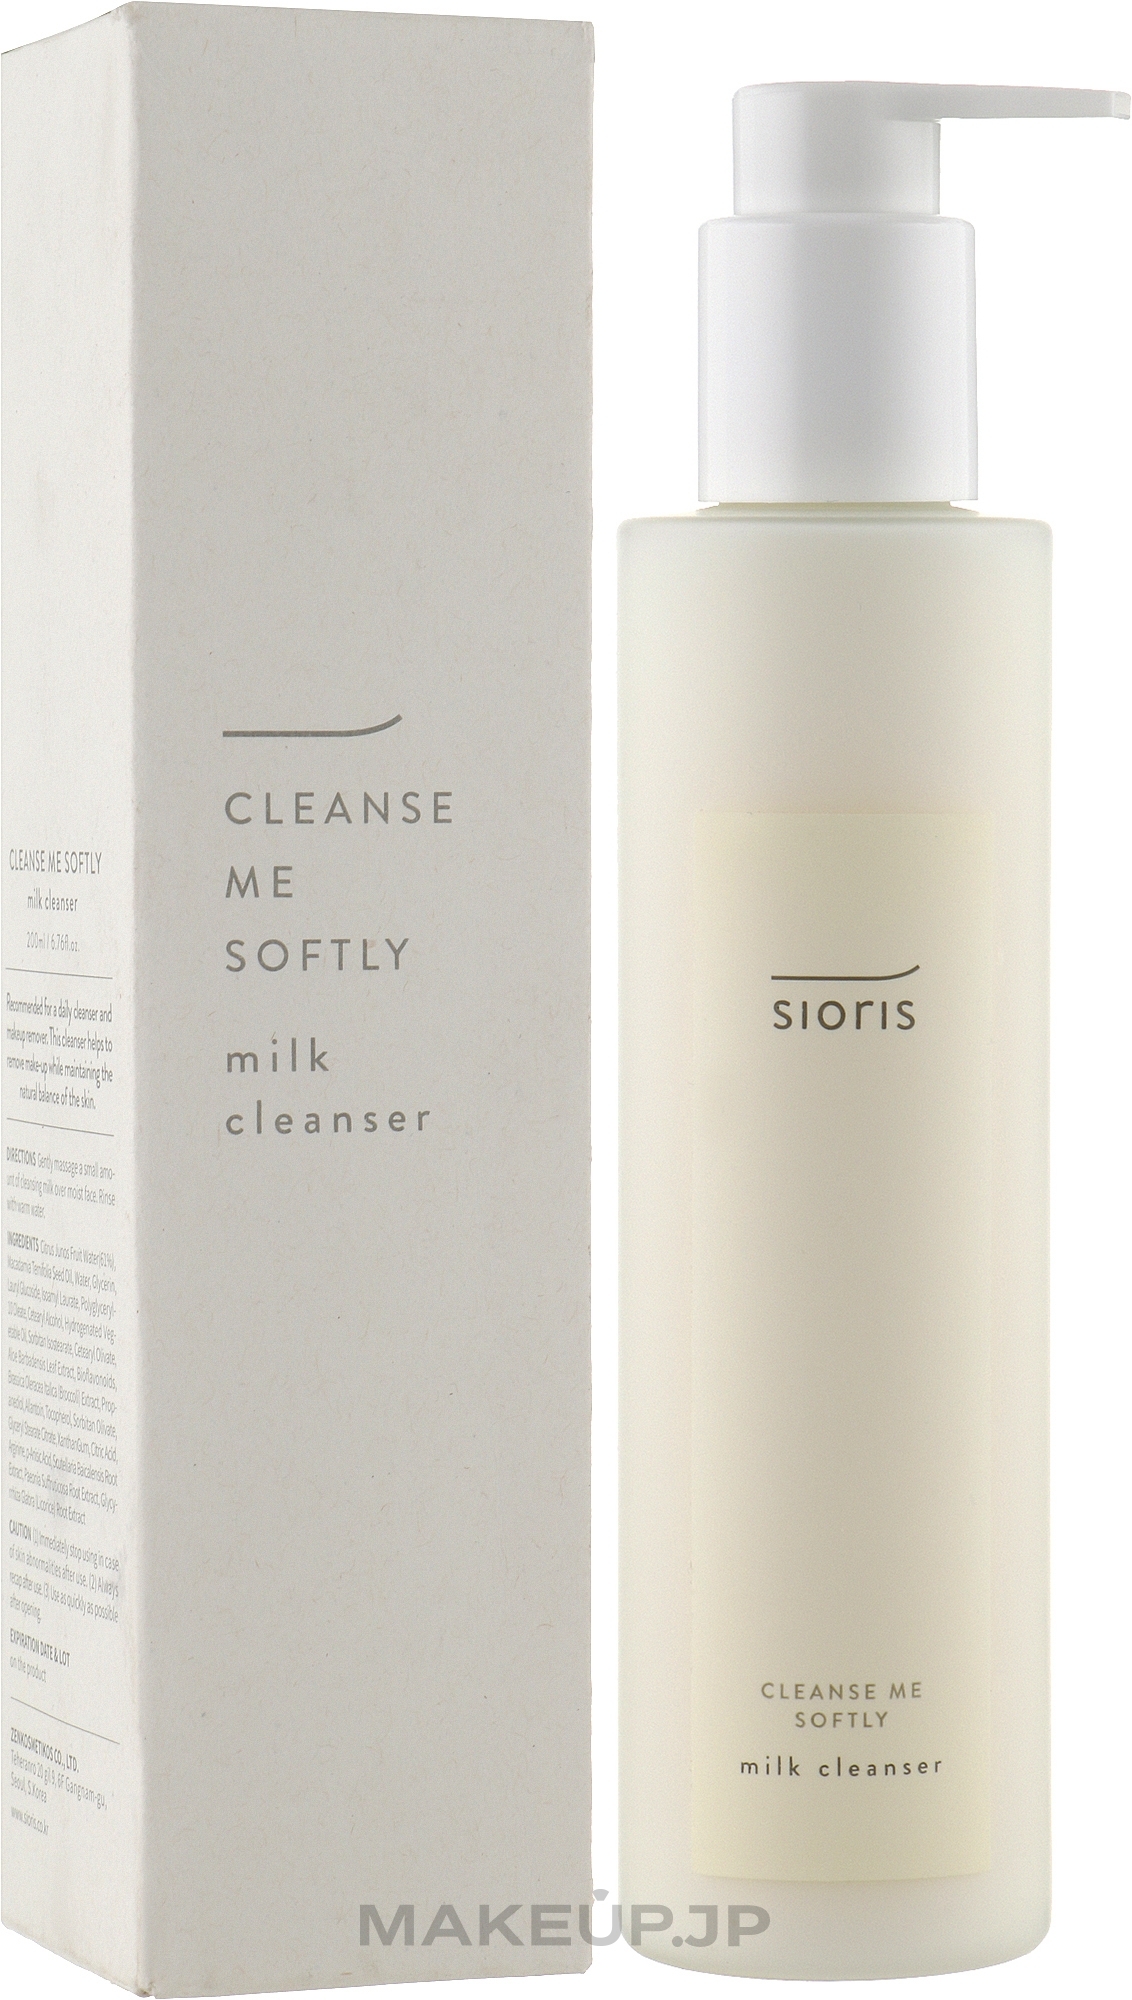 Cleansing Face Milk - Sioris Cleanse Me Softly Milk Cleanser — photo 200 ml